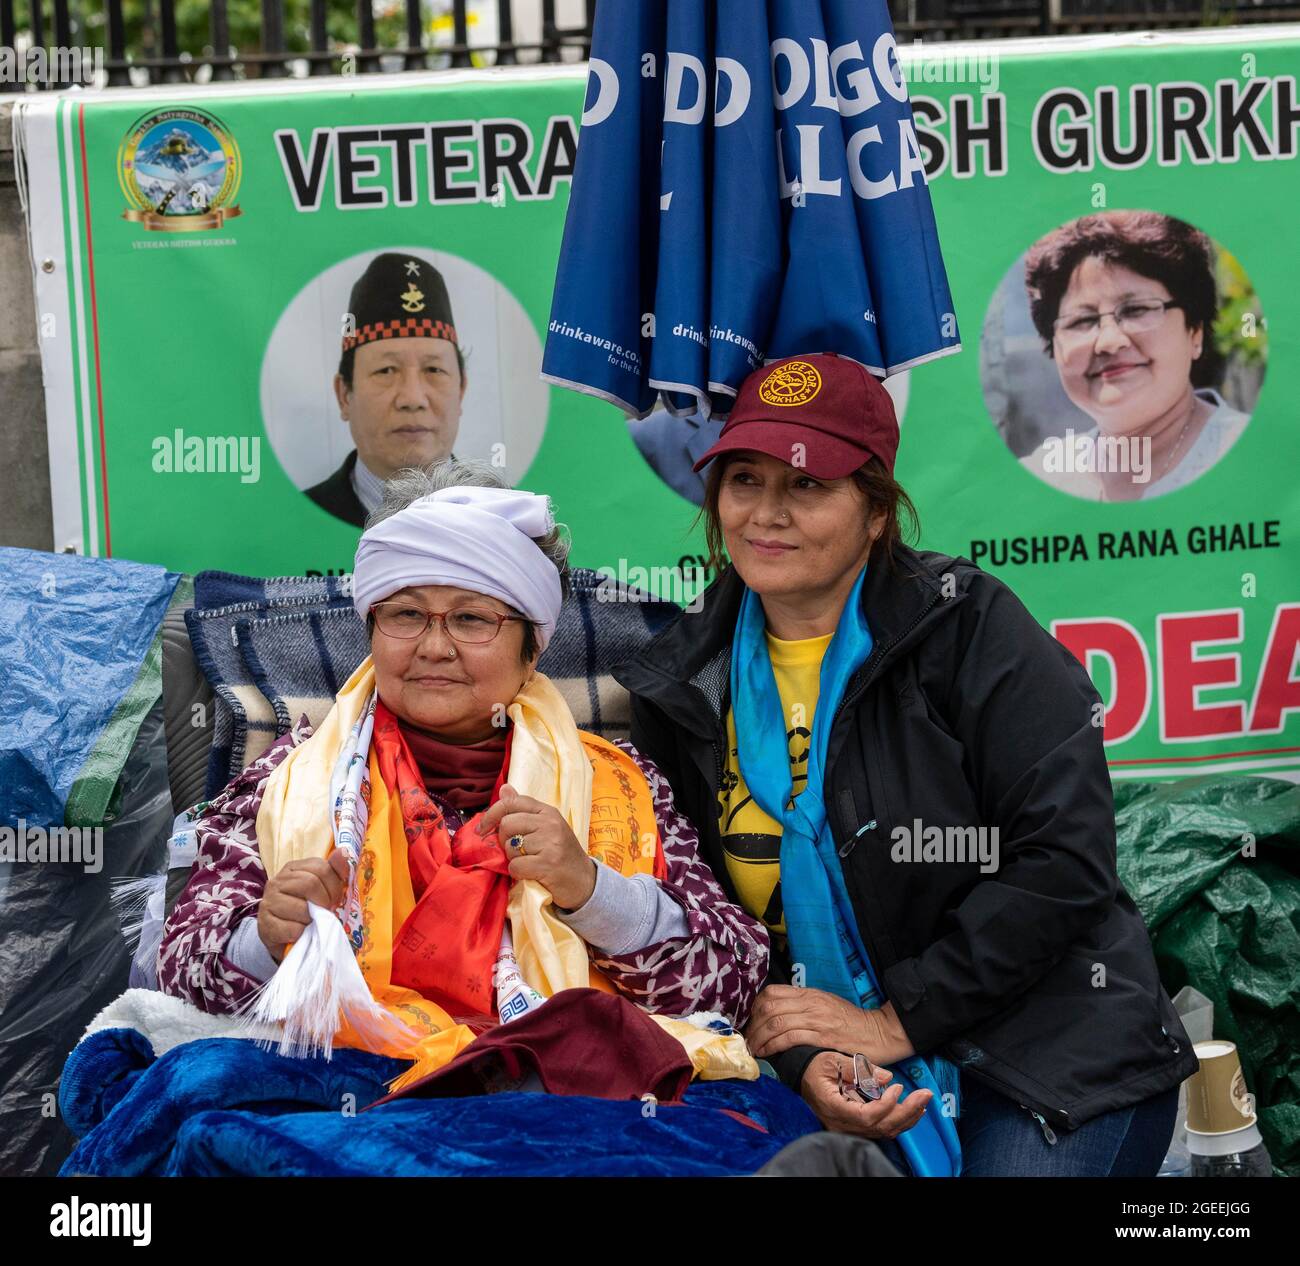 London, UK. 19th Aug, 2021. Former Gurkha soldiers have given up their 13 day hunger strike outside Downing Street, after the UK Government agreed to further talks. Credit: Ian Davidson/Alamy Live News Stock Photo